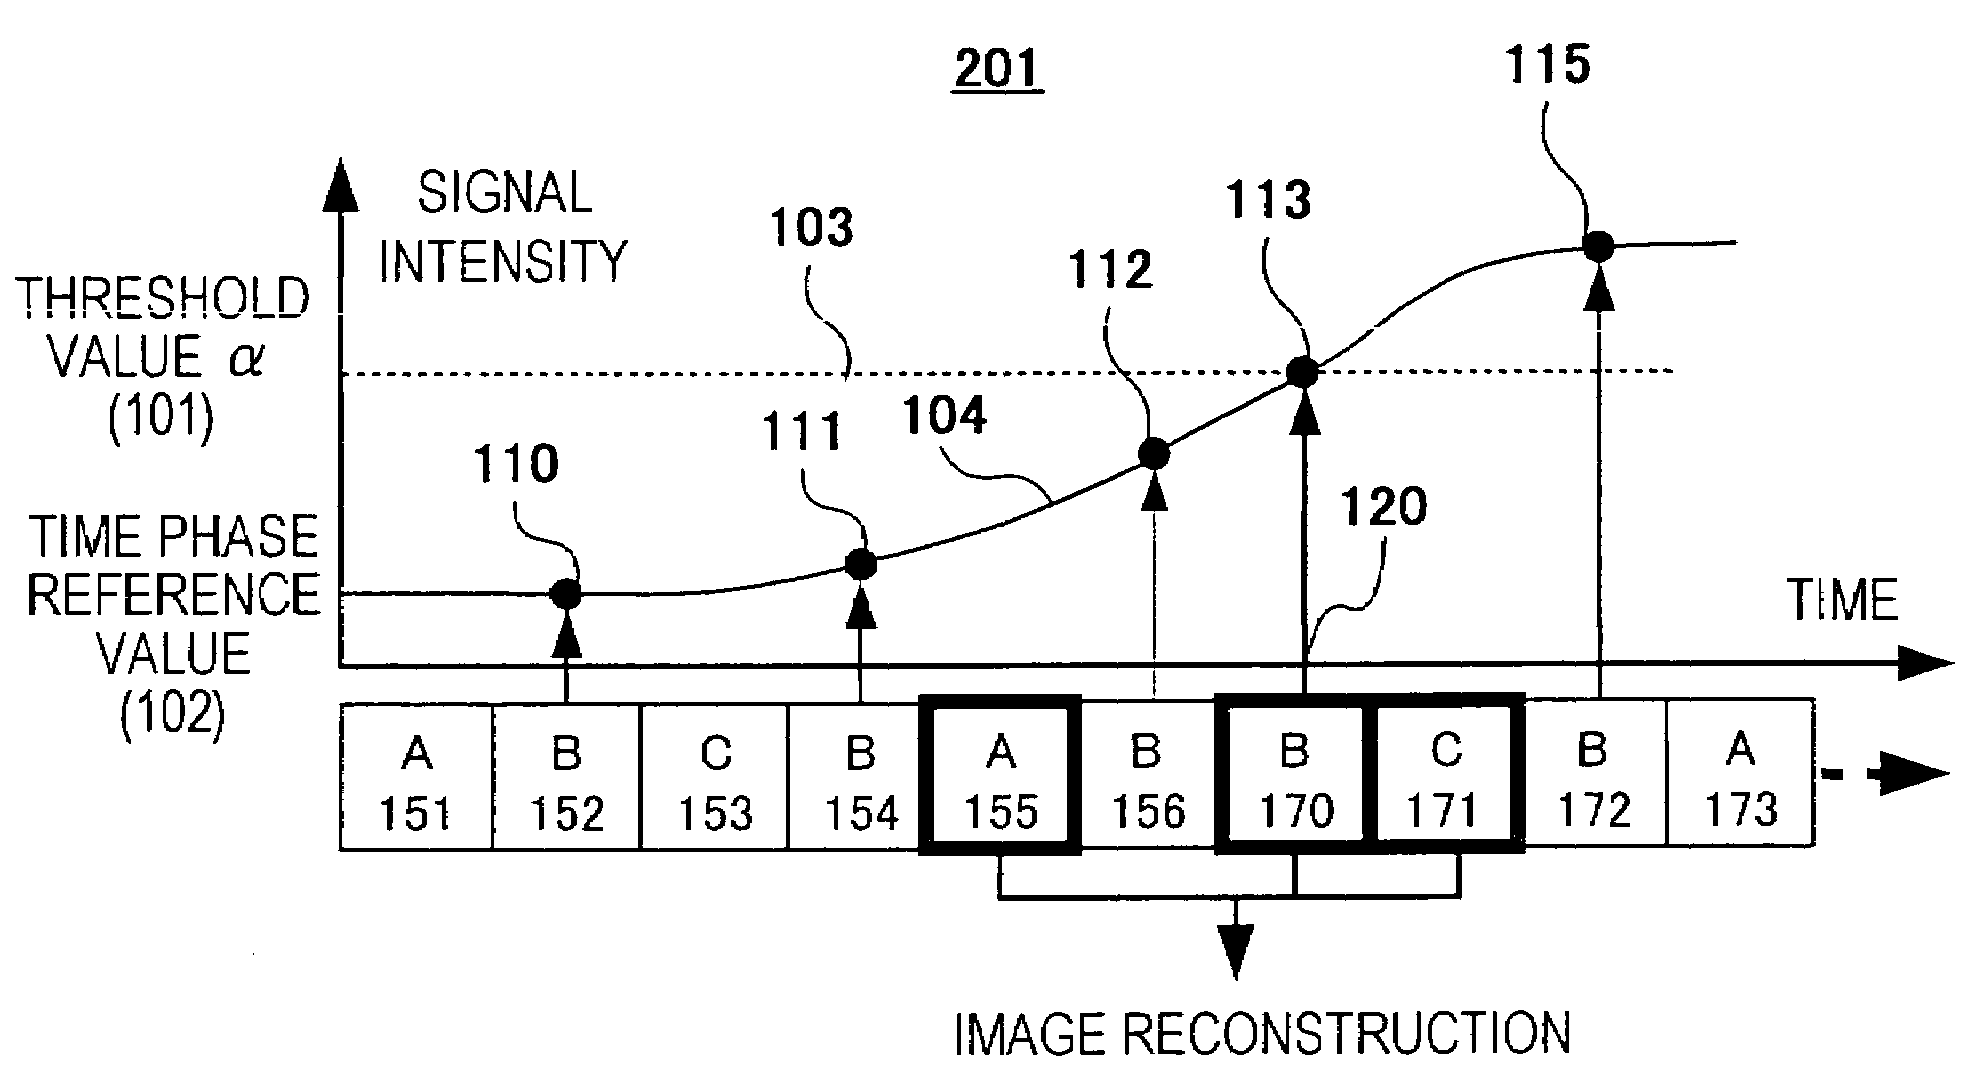 Magnetic resonance imaging system and method